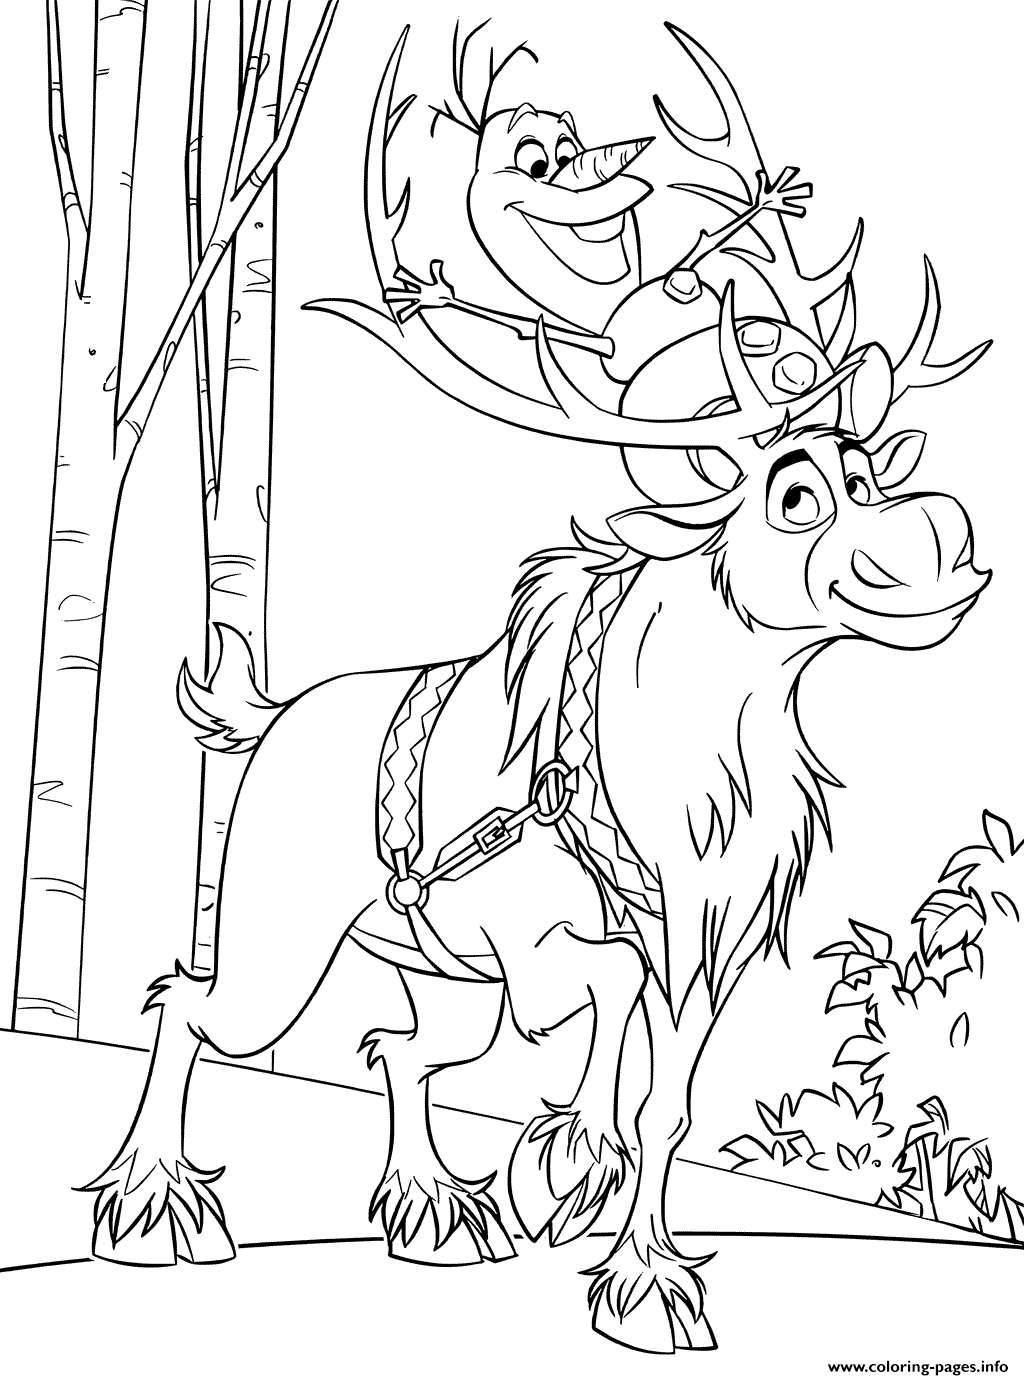 Snowman Olaf And Sven Reindeer coloring